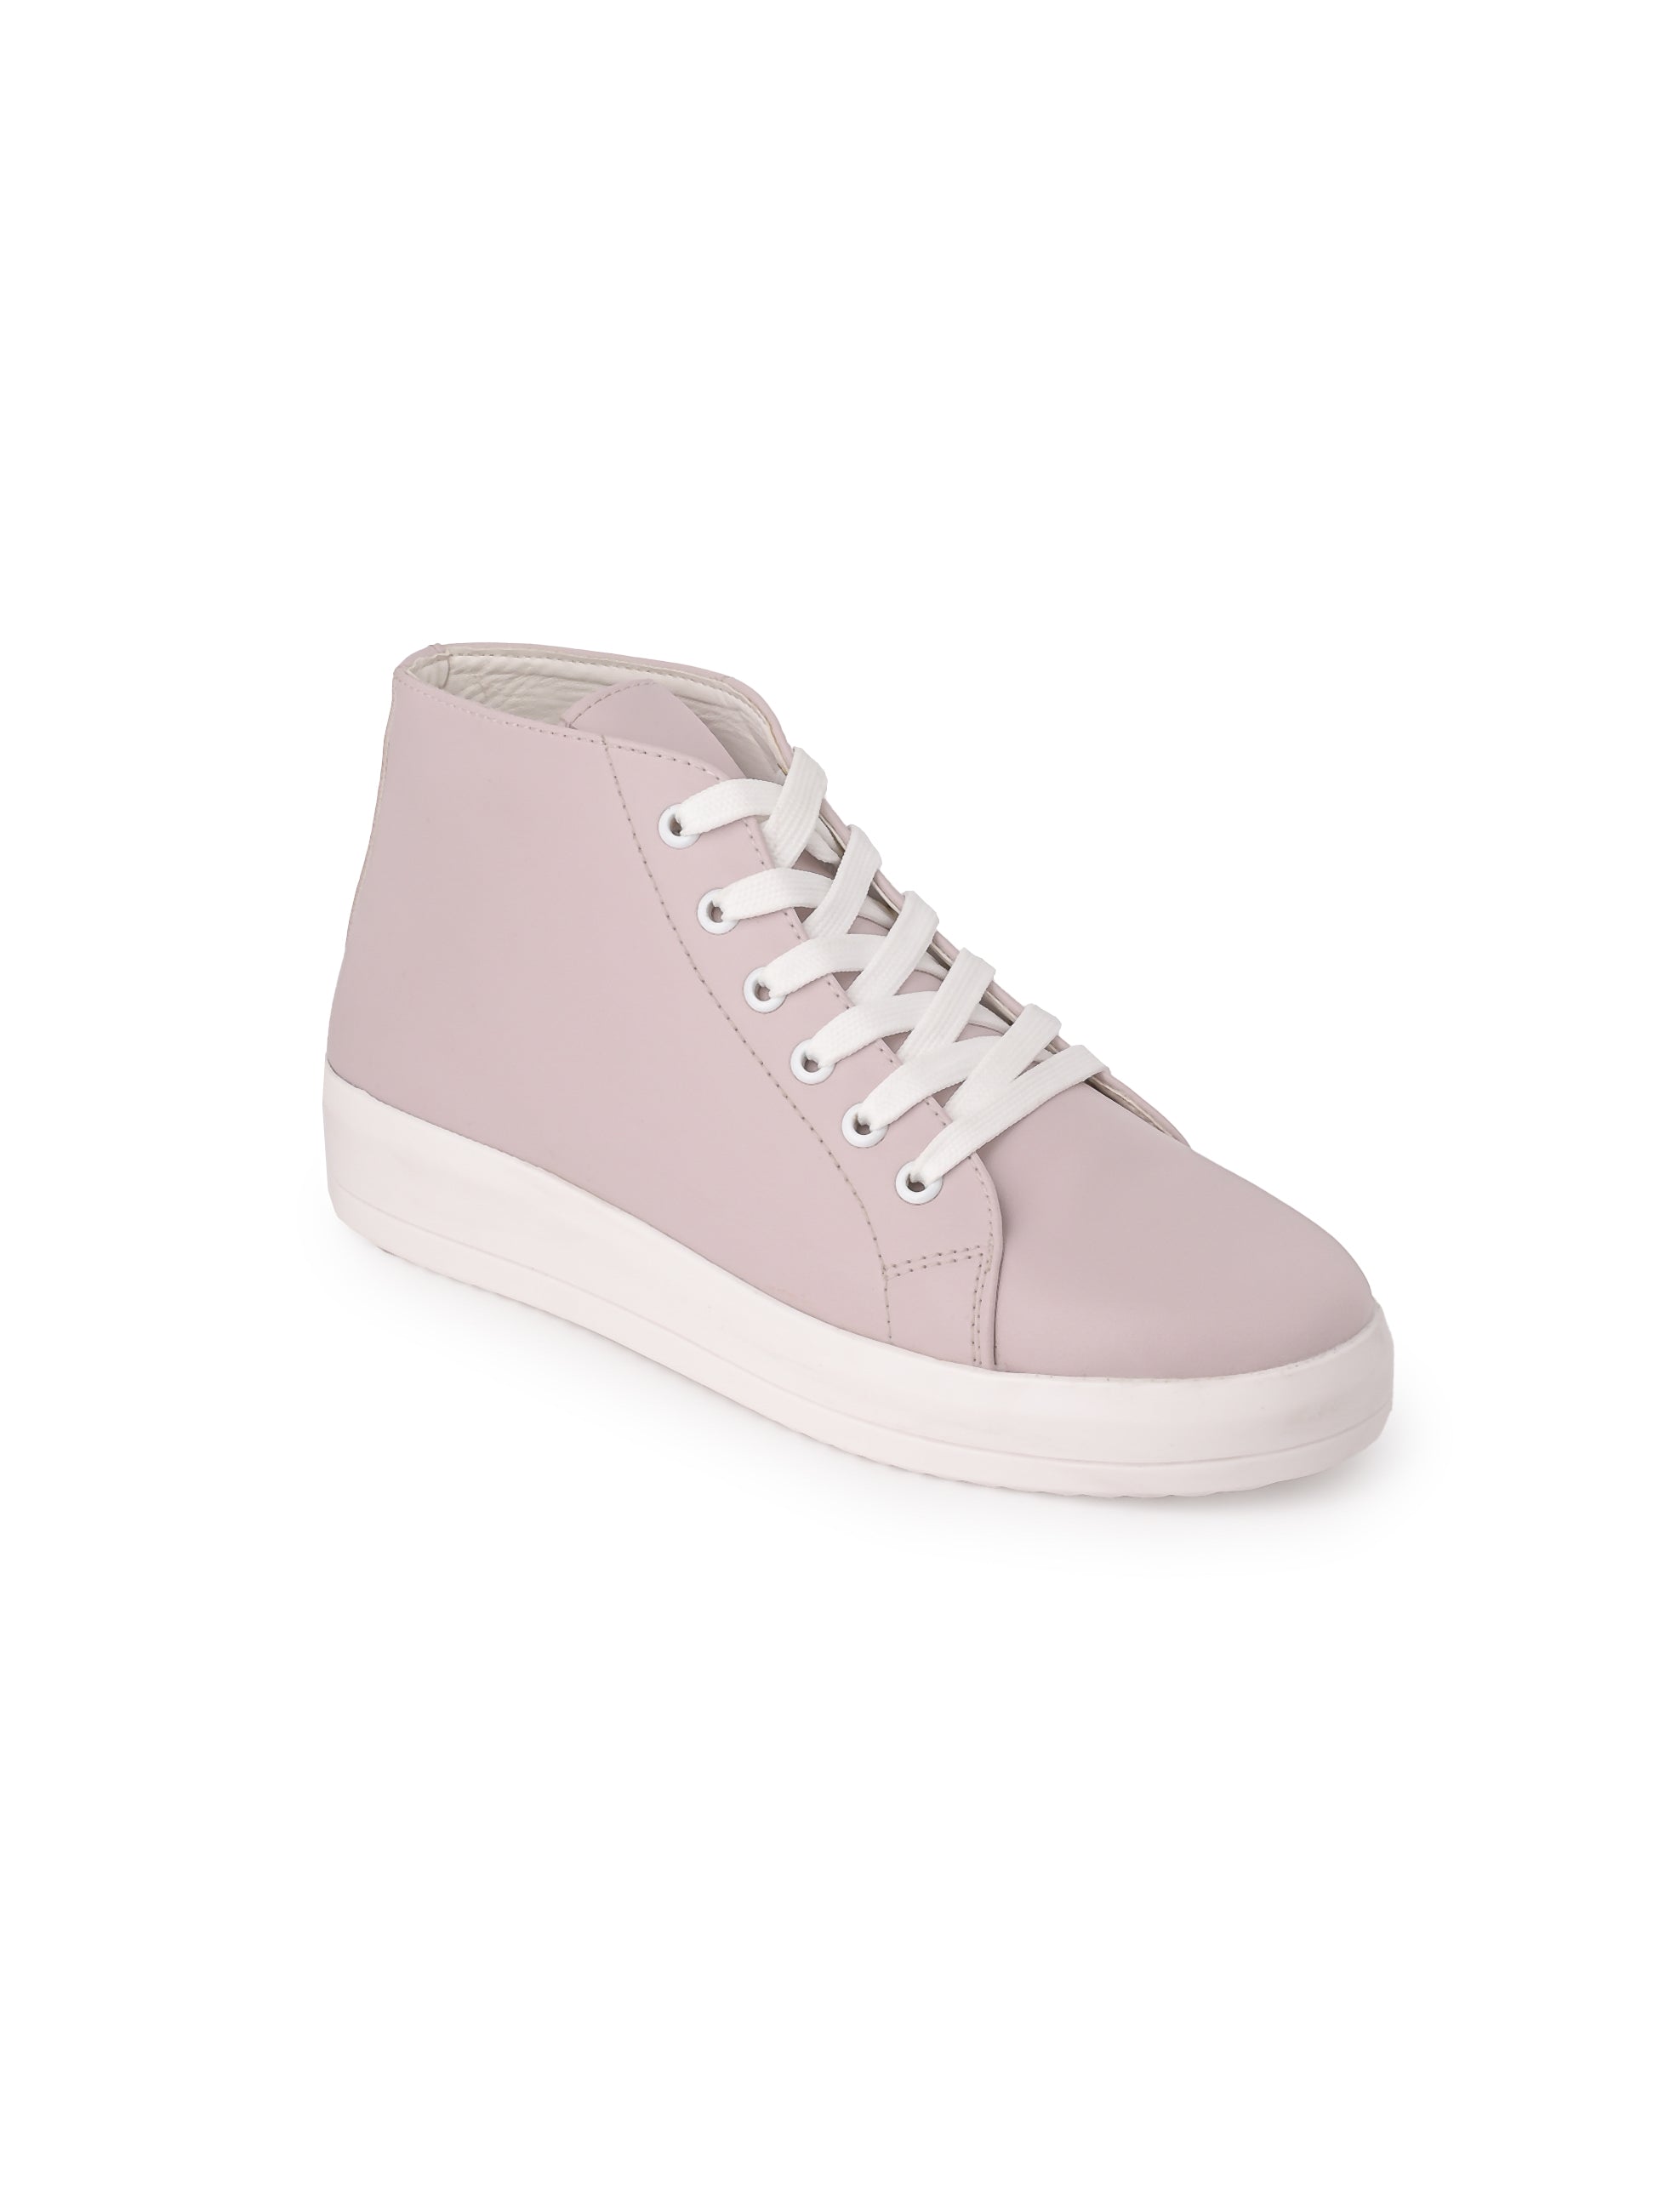 Esmee Cityscape Trainers for Women - Pink